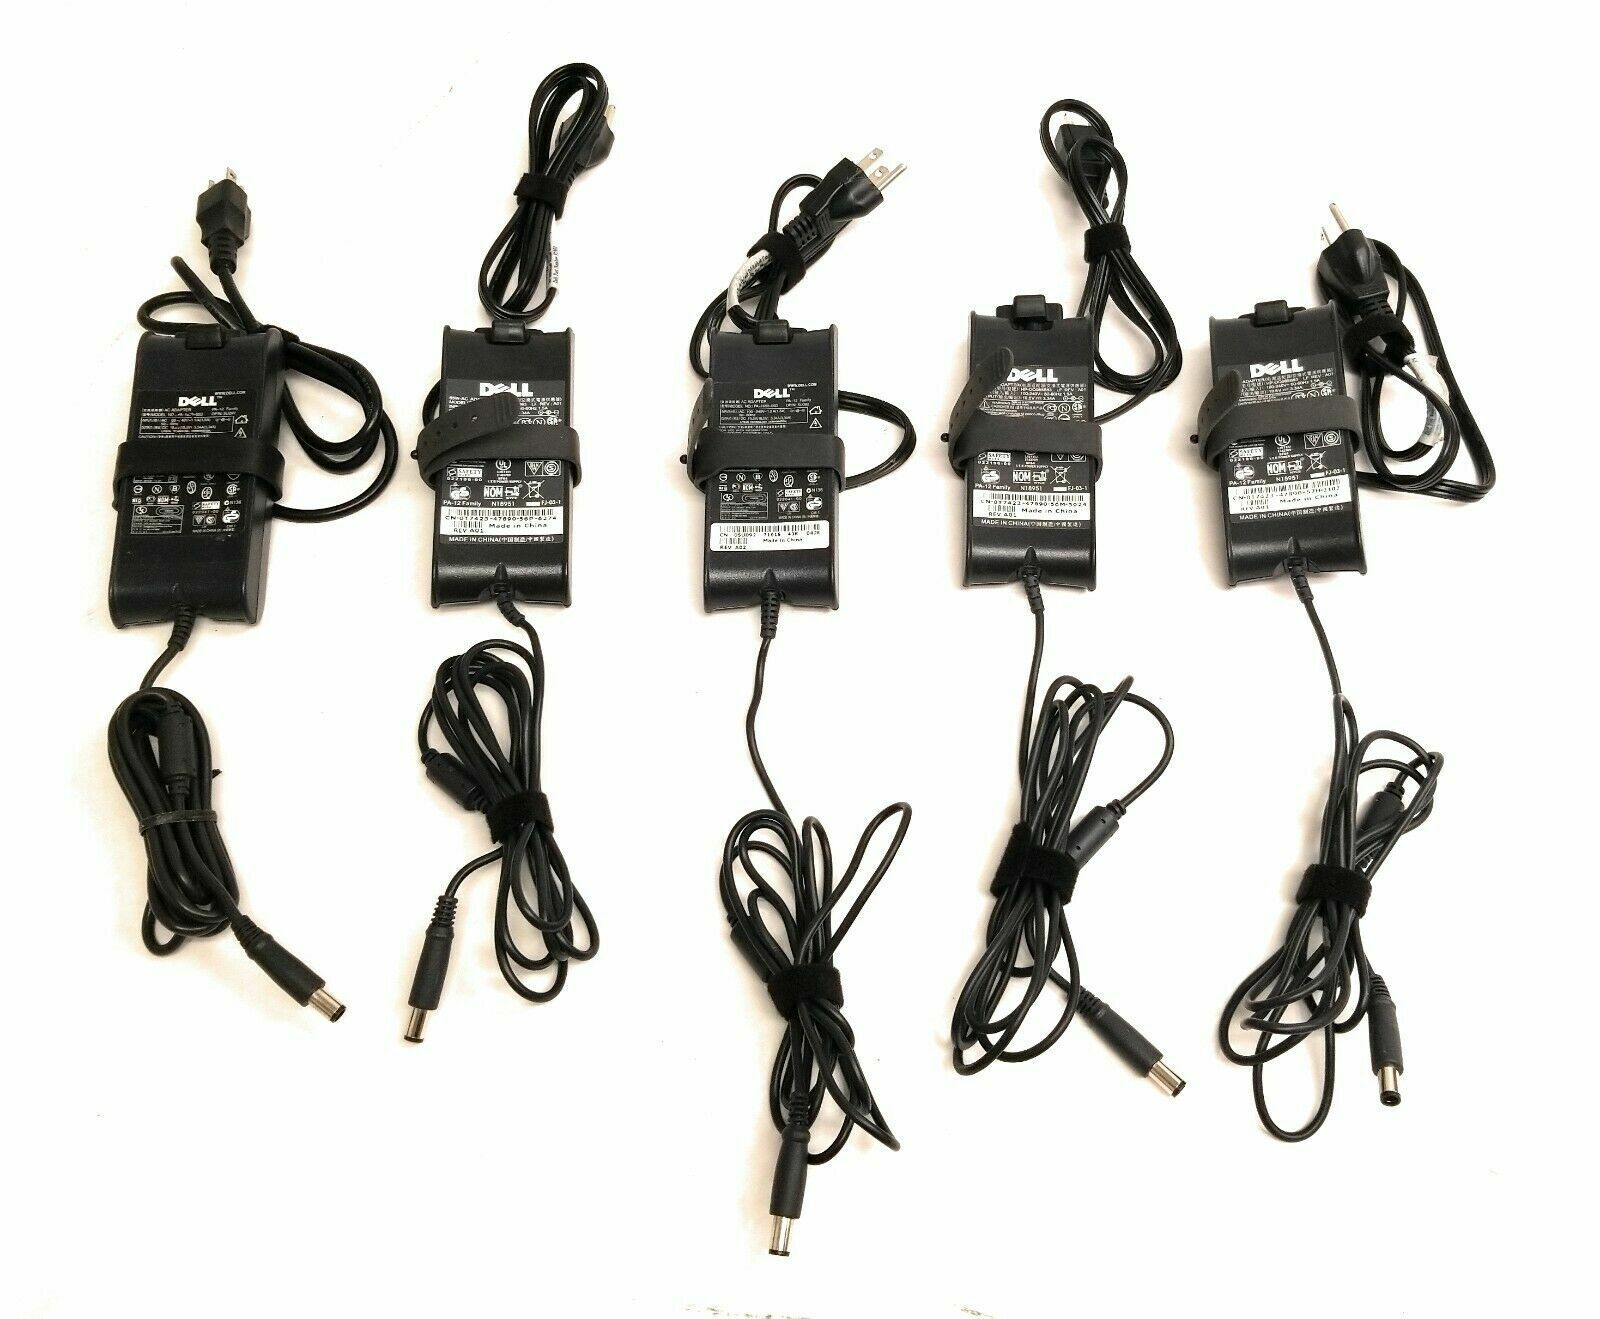 Lot of 10 OEM Dell Laptop Charger AC Power Adapter 19.5V 3.34A 65W PA-12